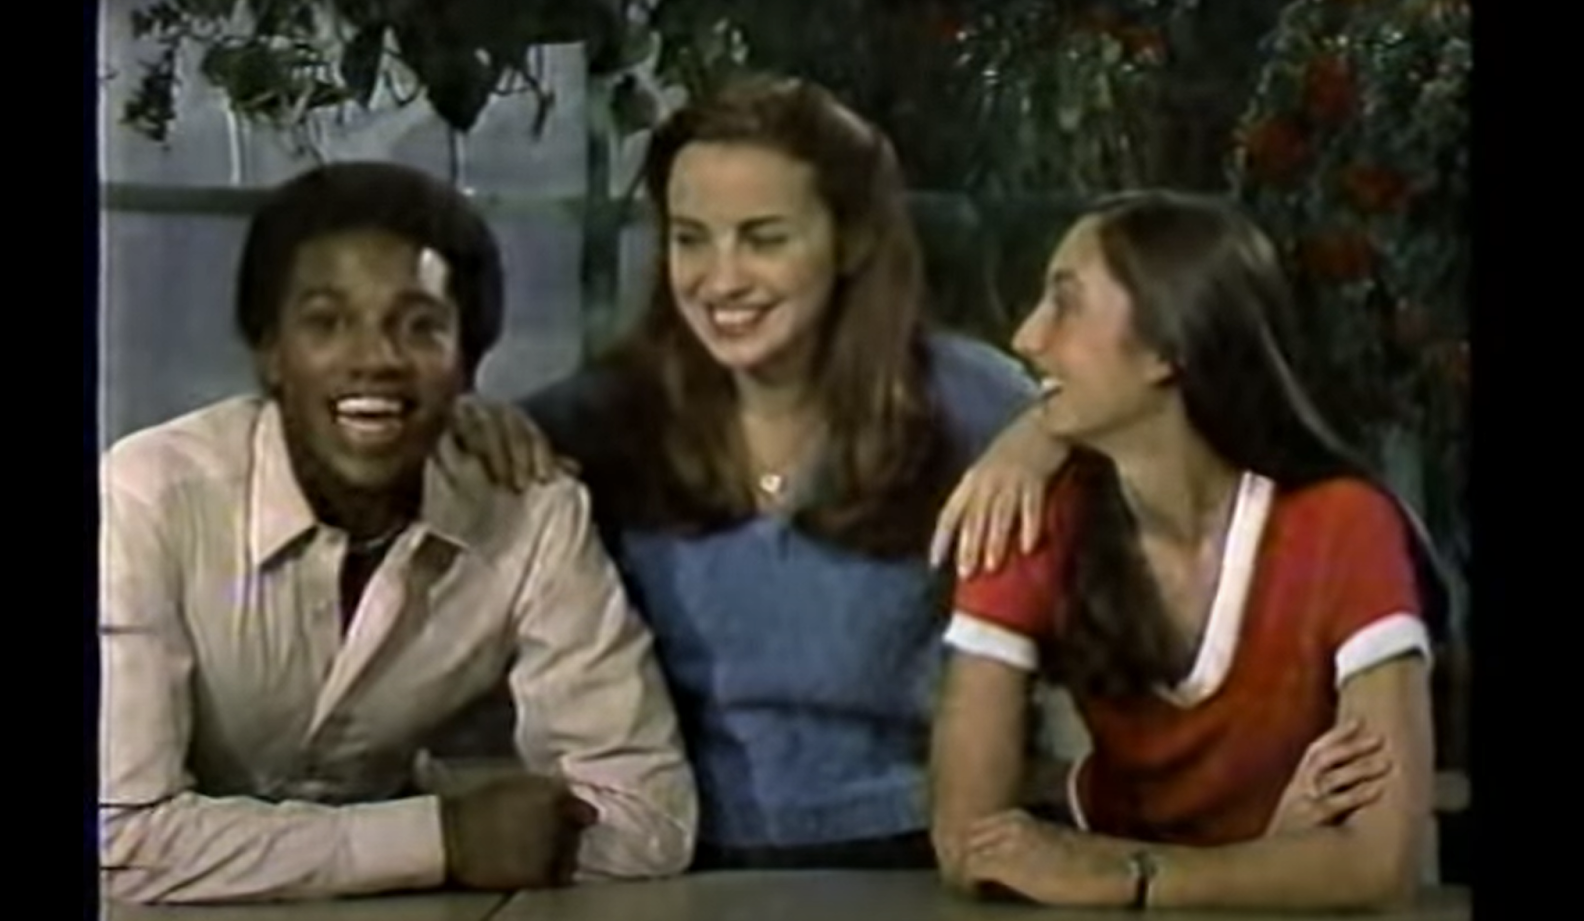 The original cast of 3-2-1 Contact! From left, Marc (Leon W. Grant), Lisa (Liz Moses), and Trini (Ginny Ortiz)